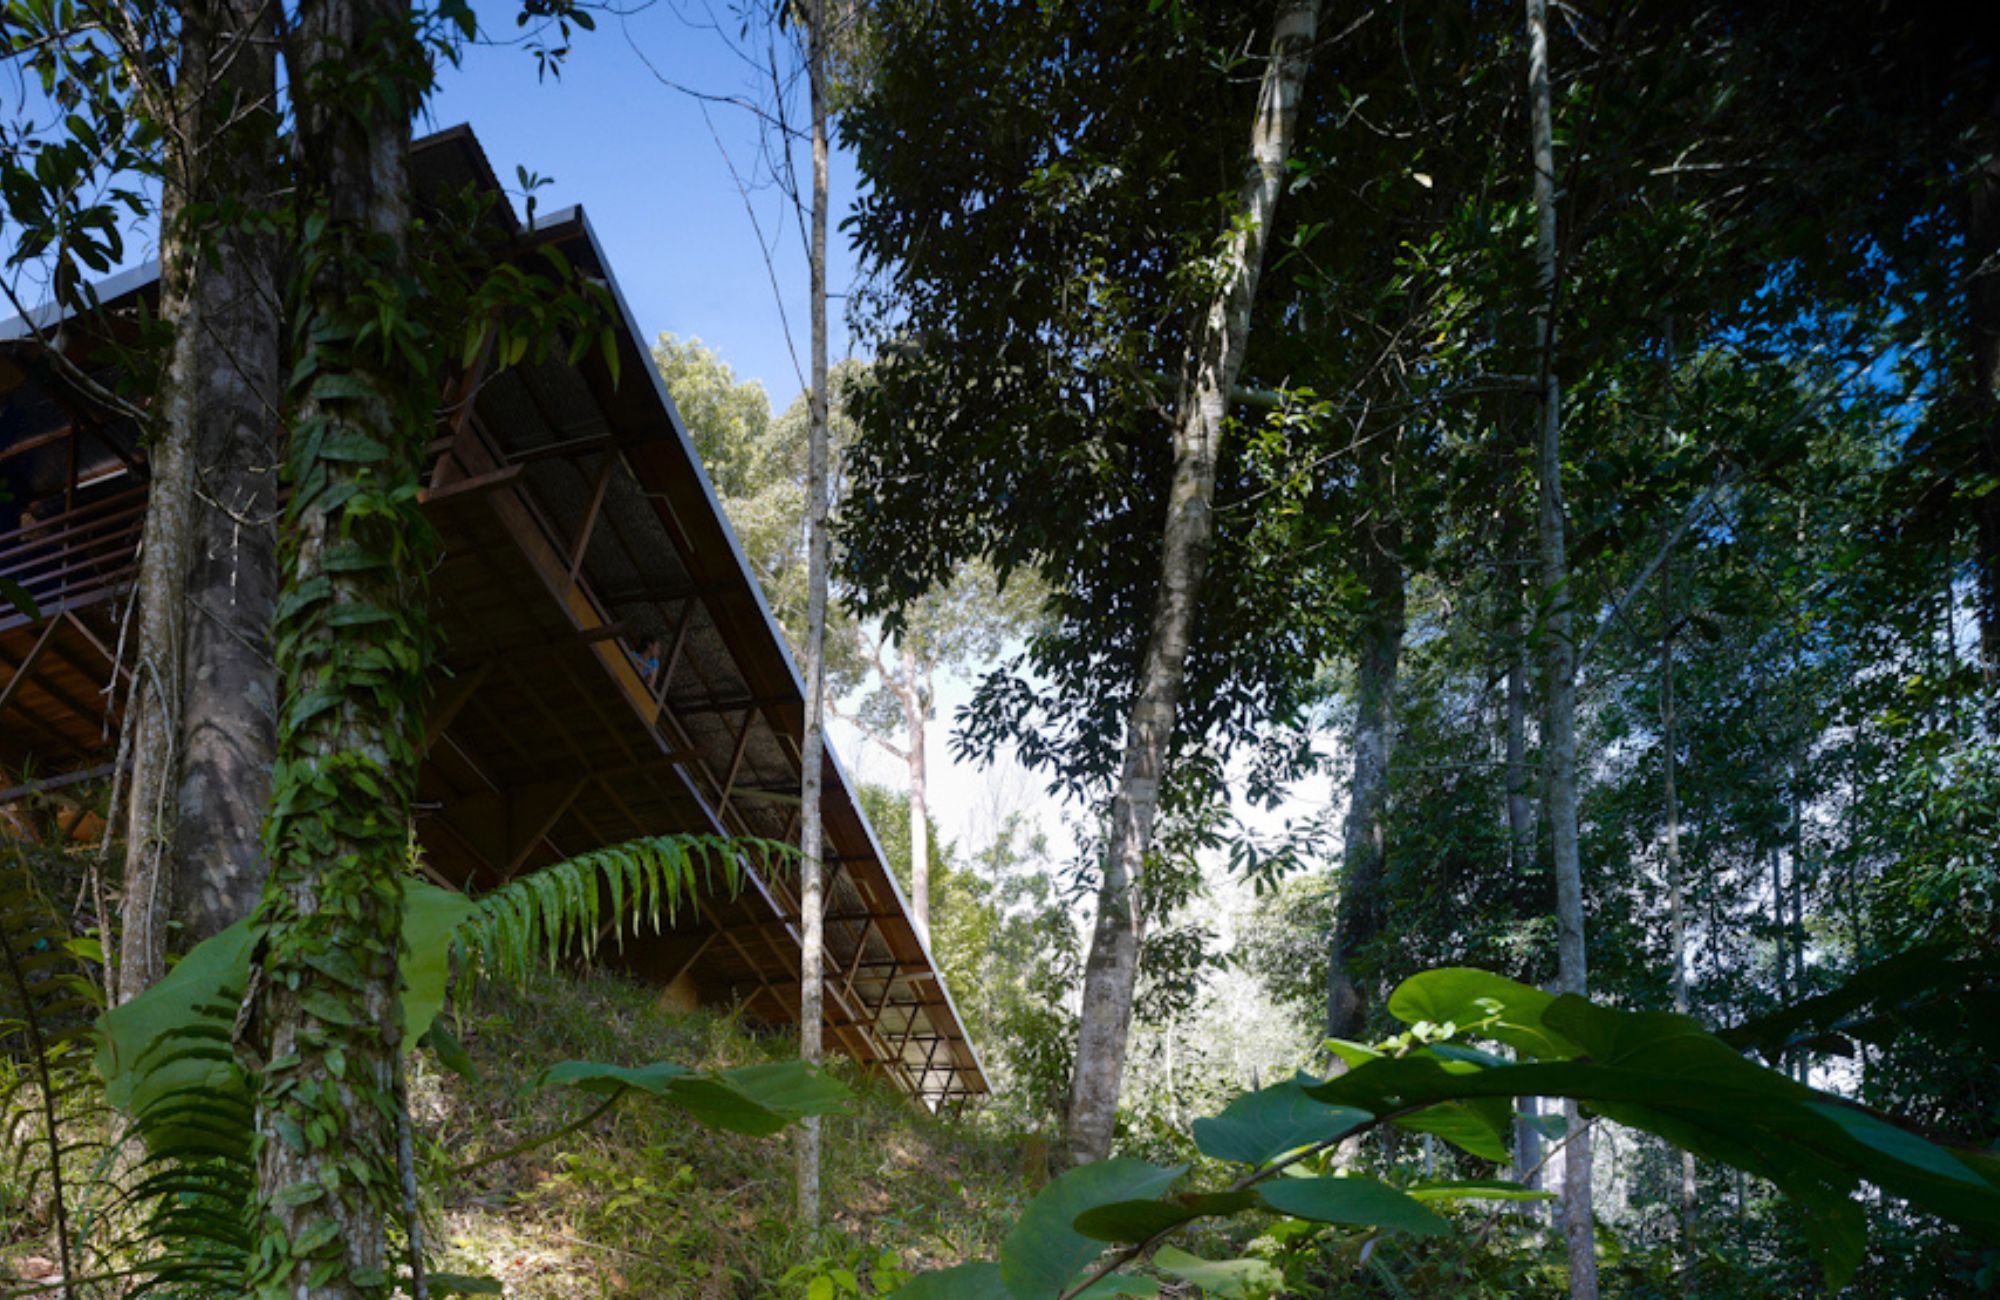 Shelter @ Rainforest by Marra + Yeh Architects showing building in tropical jungle setting